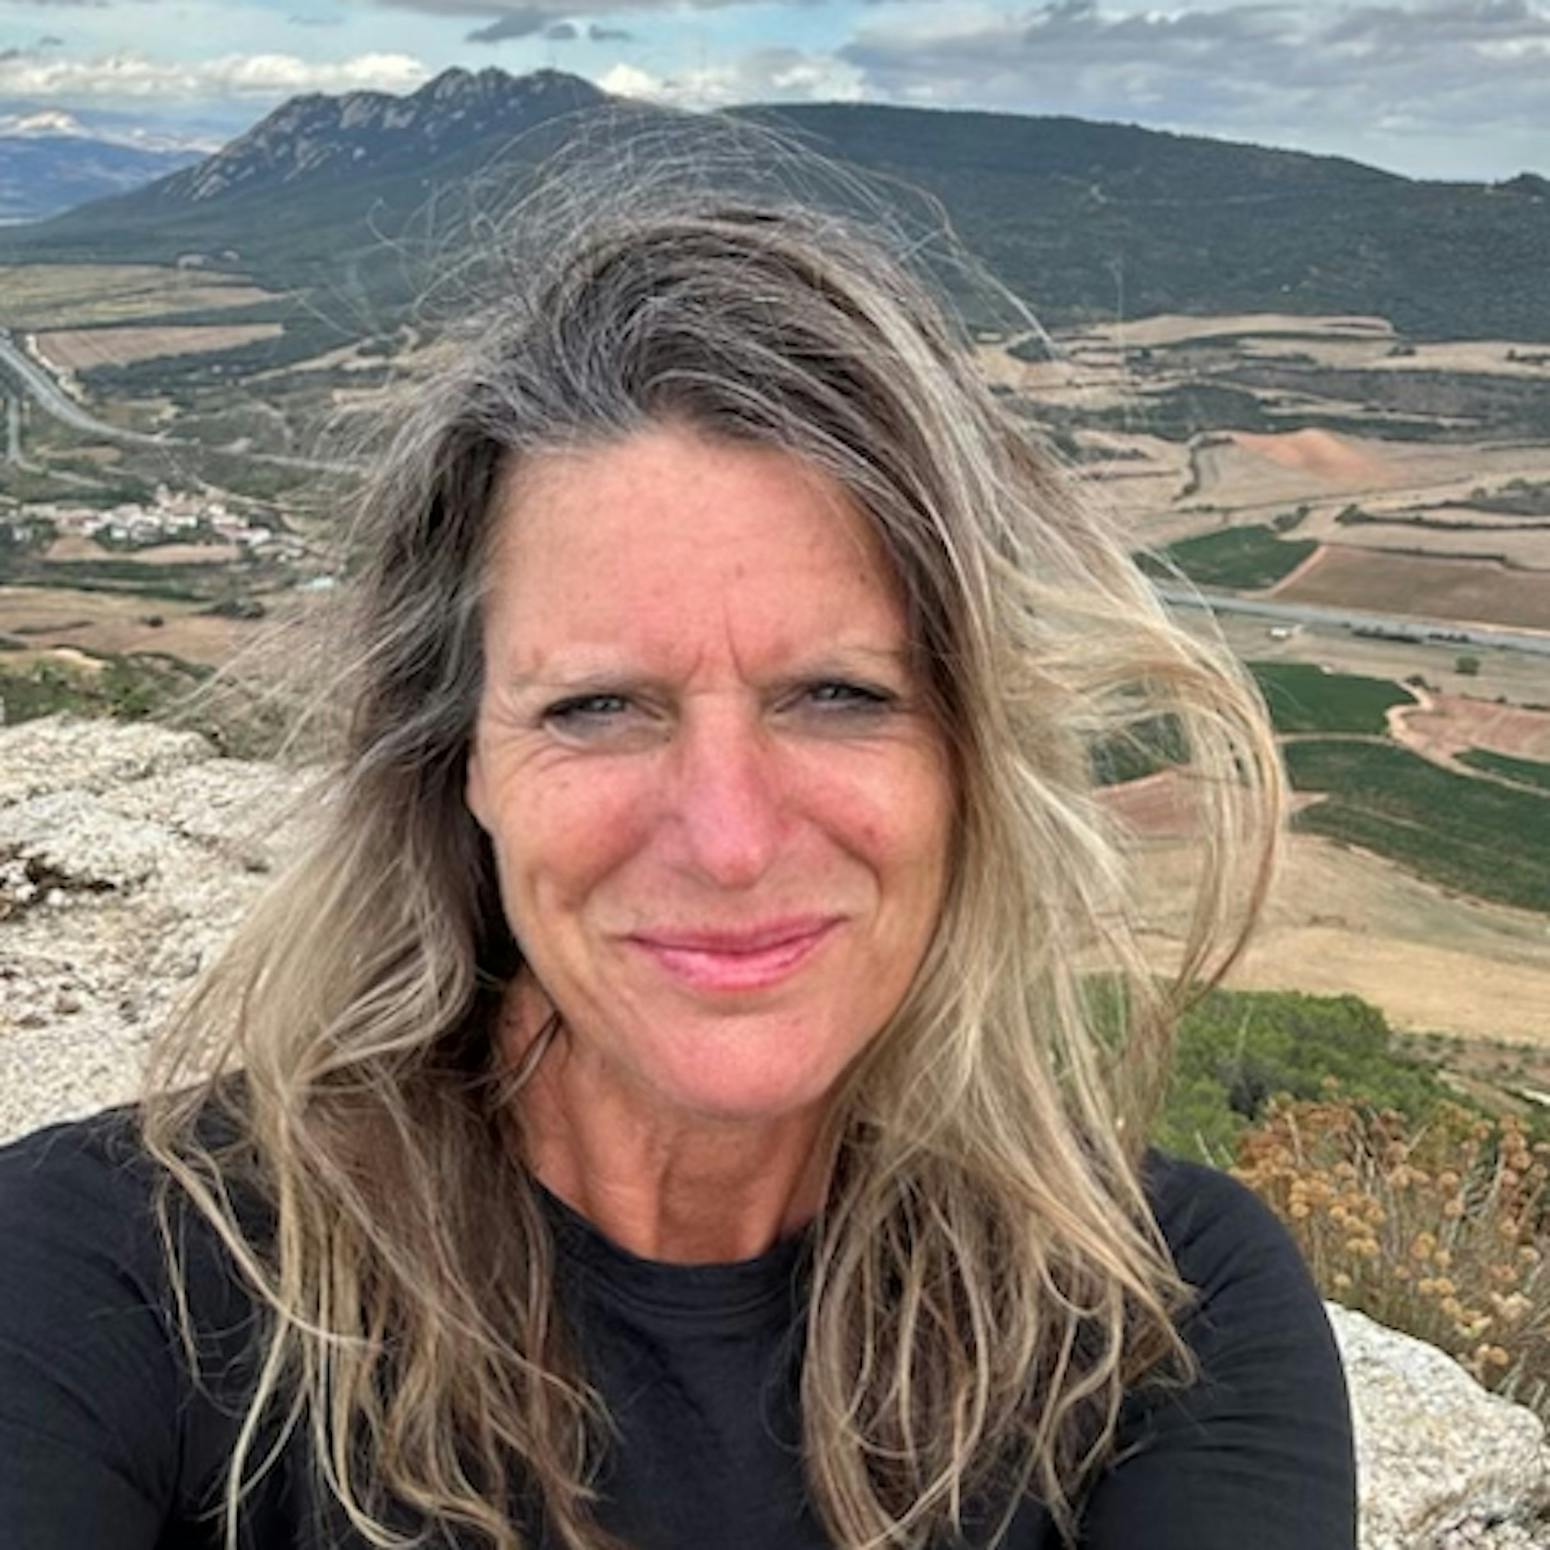 Canadian pilgrim Cindy McGann: growing within, on the Camino